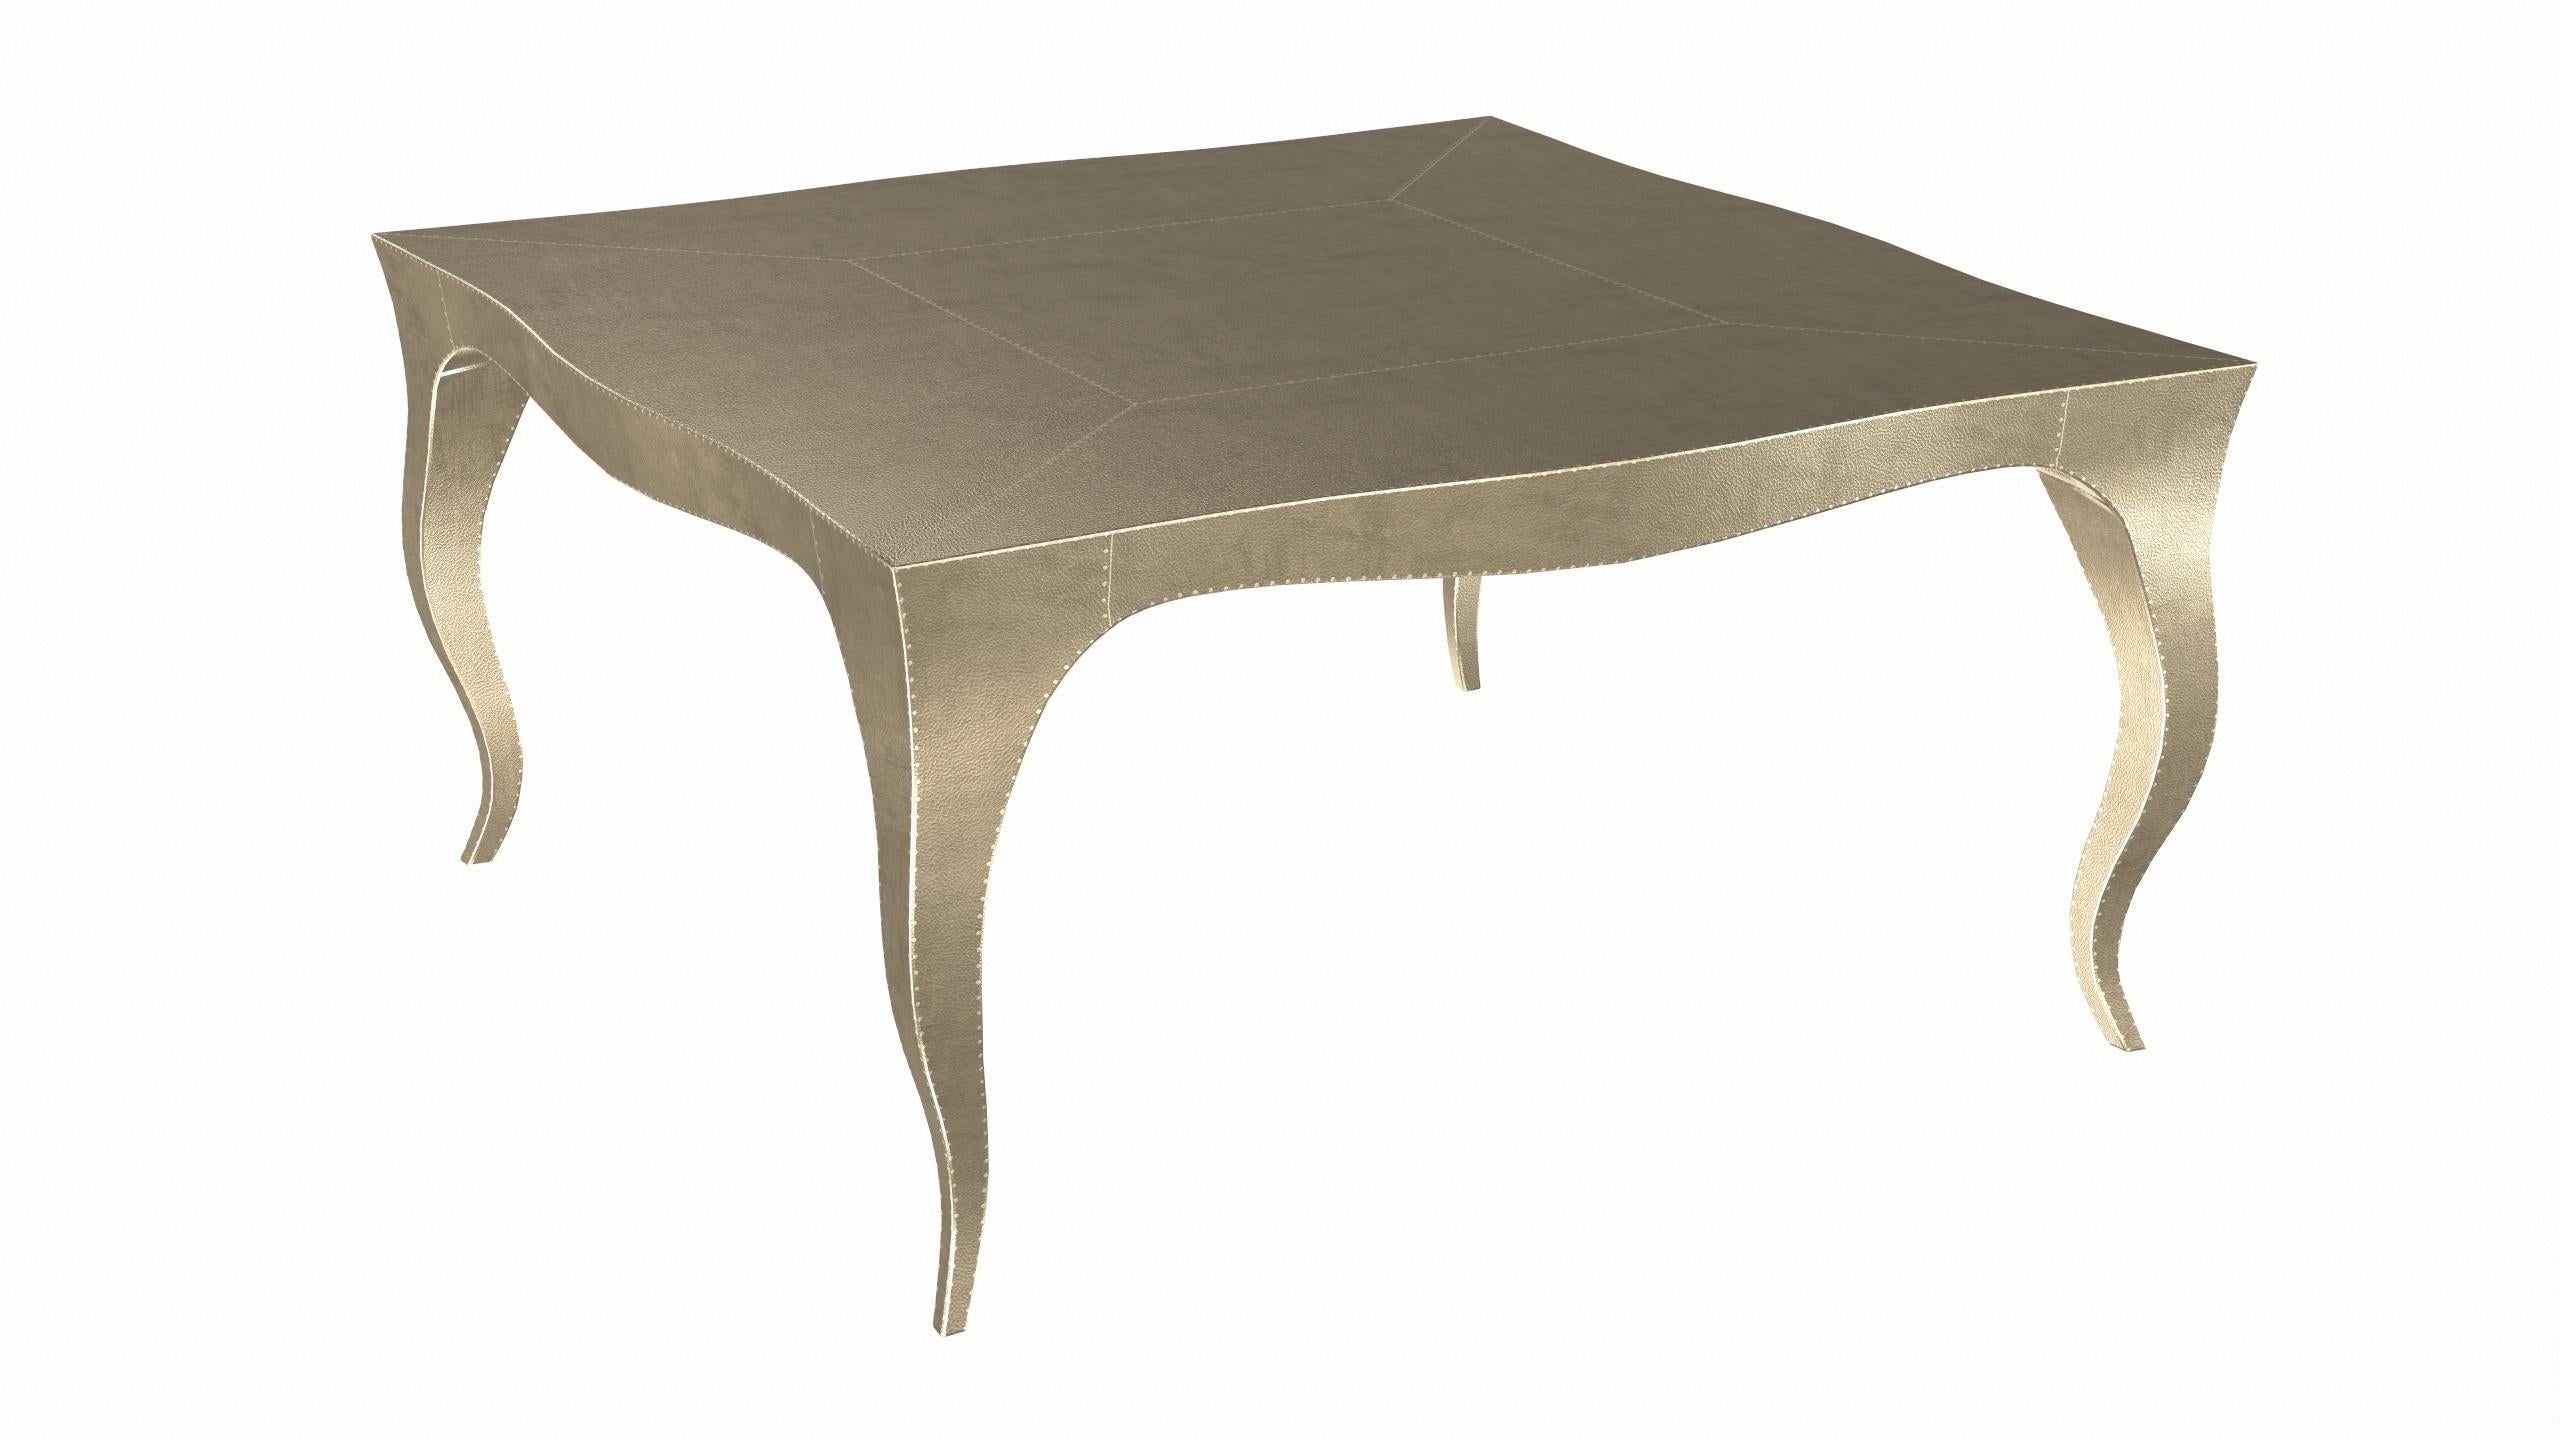 Metal Louise Art Deco Nesting Tables Fine Hammered Brass 18.5x18.5x10 inch by Paul M For Sale